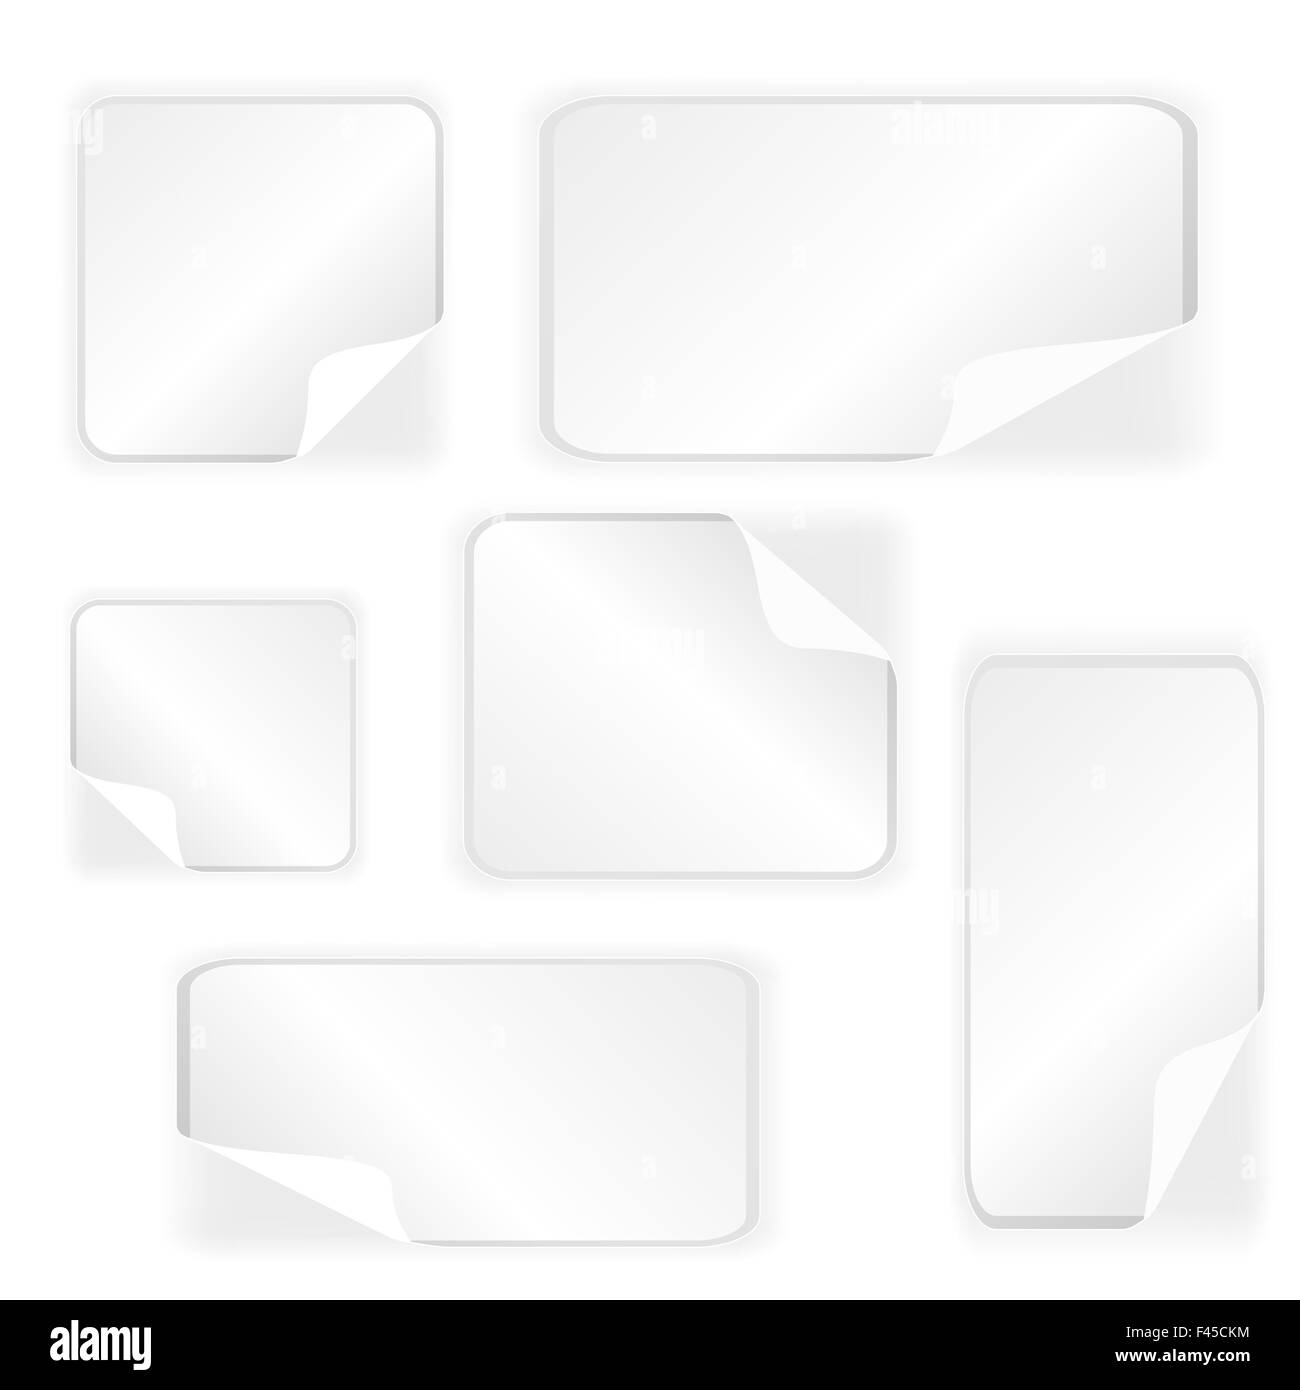 Rems logo. Sticker black letters on the white wall Stock Photo - Alamy